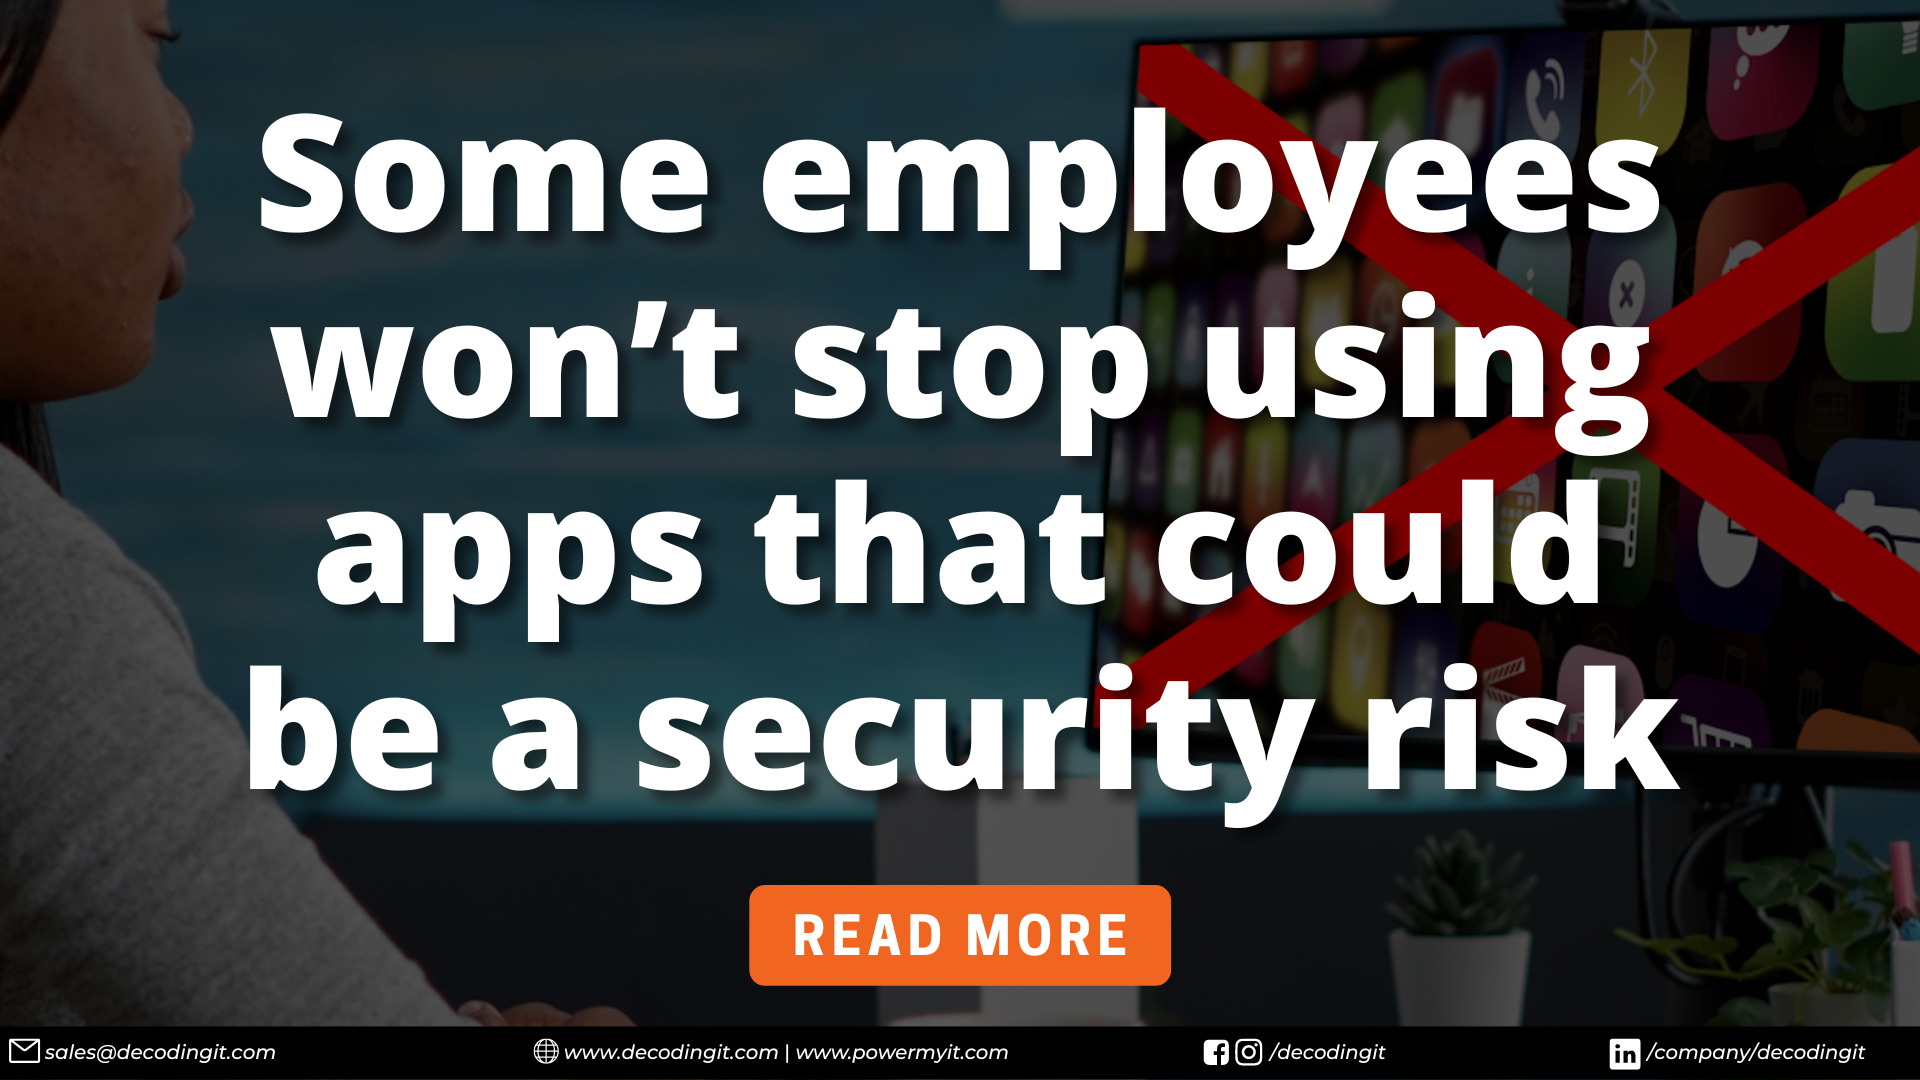 Some employees won’t stop using apps that could be a security risk